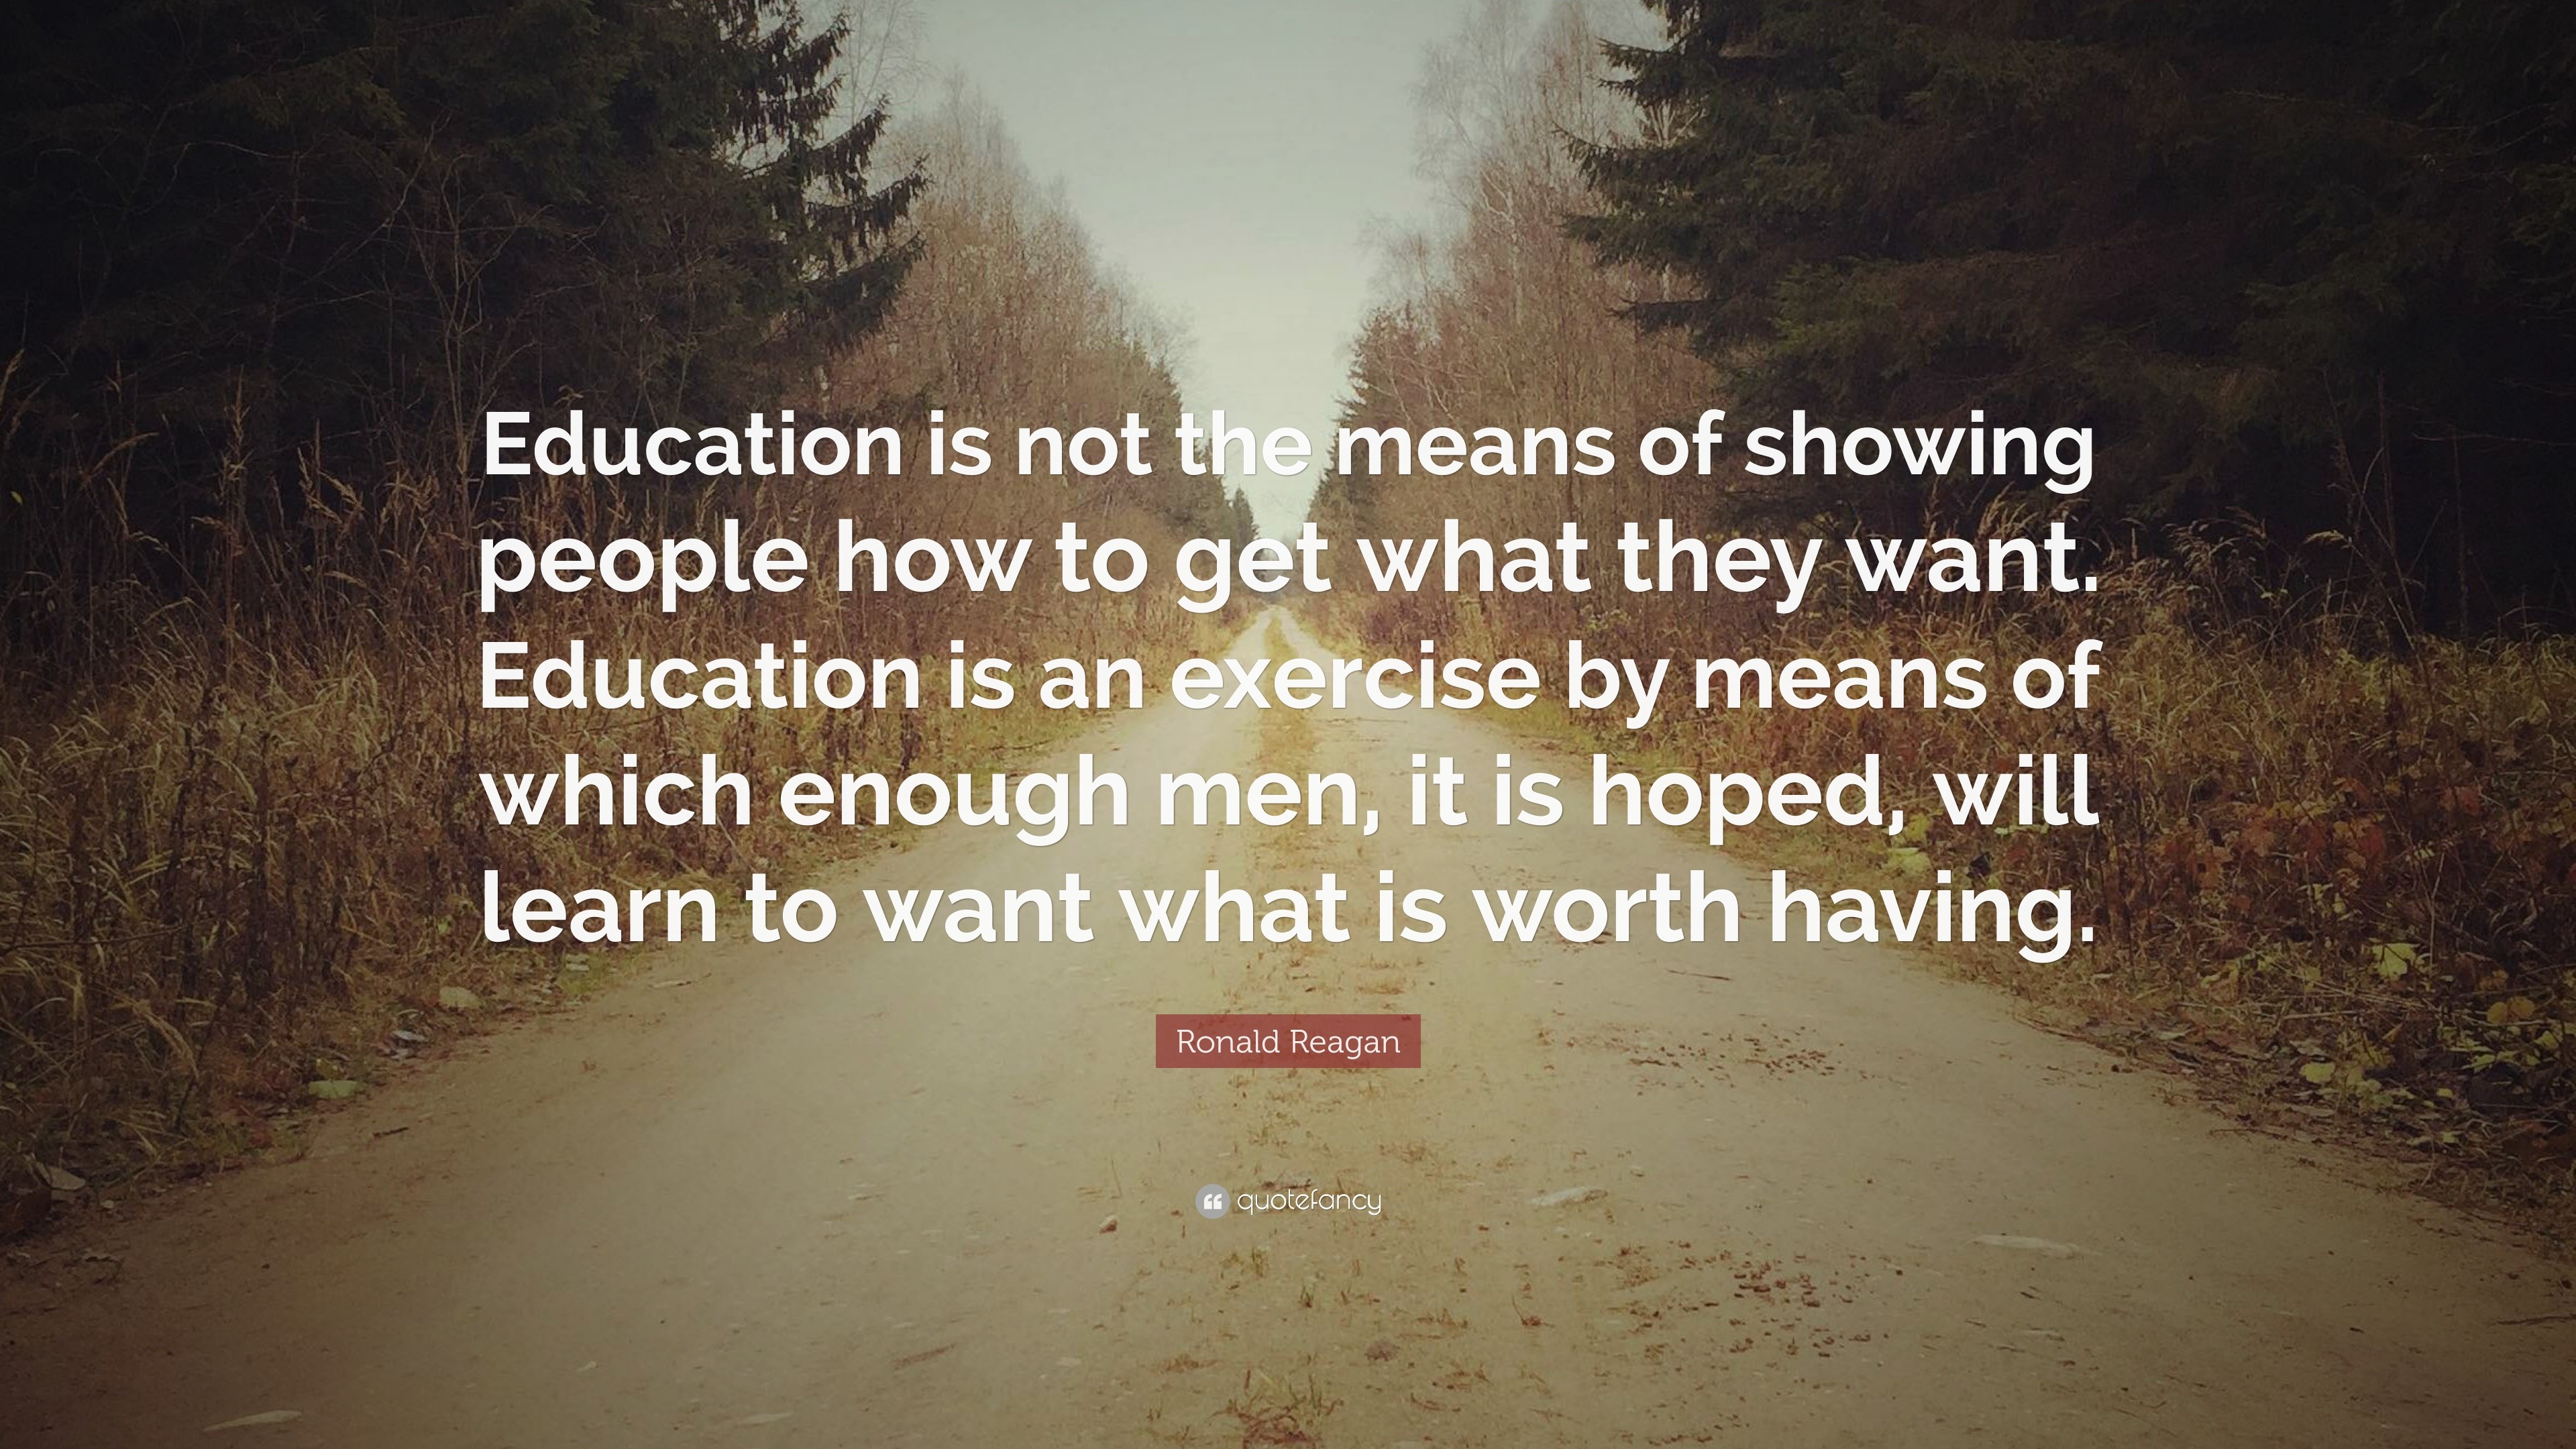 Ronald Reagan Quote: “Education is not the means of showing people how ...